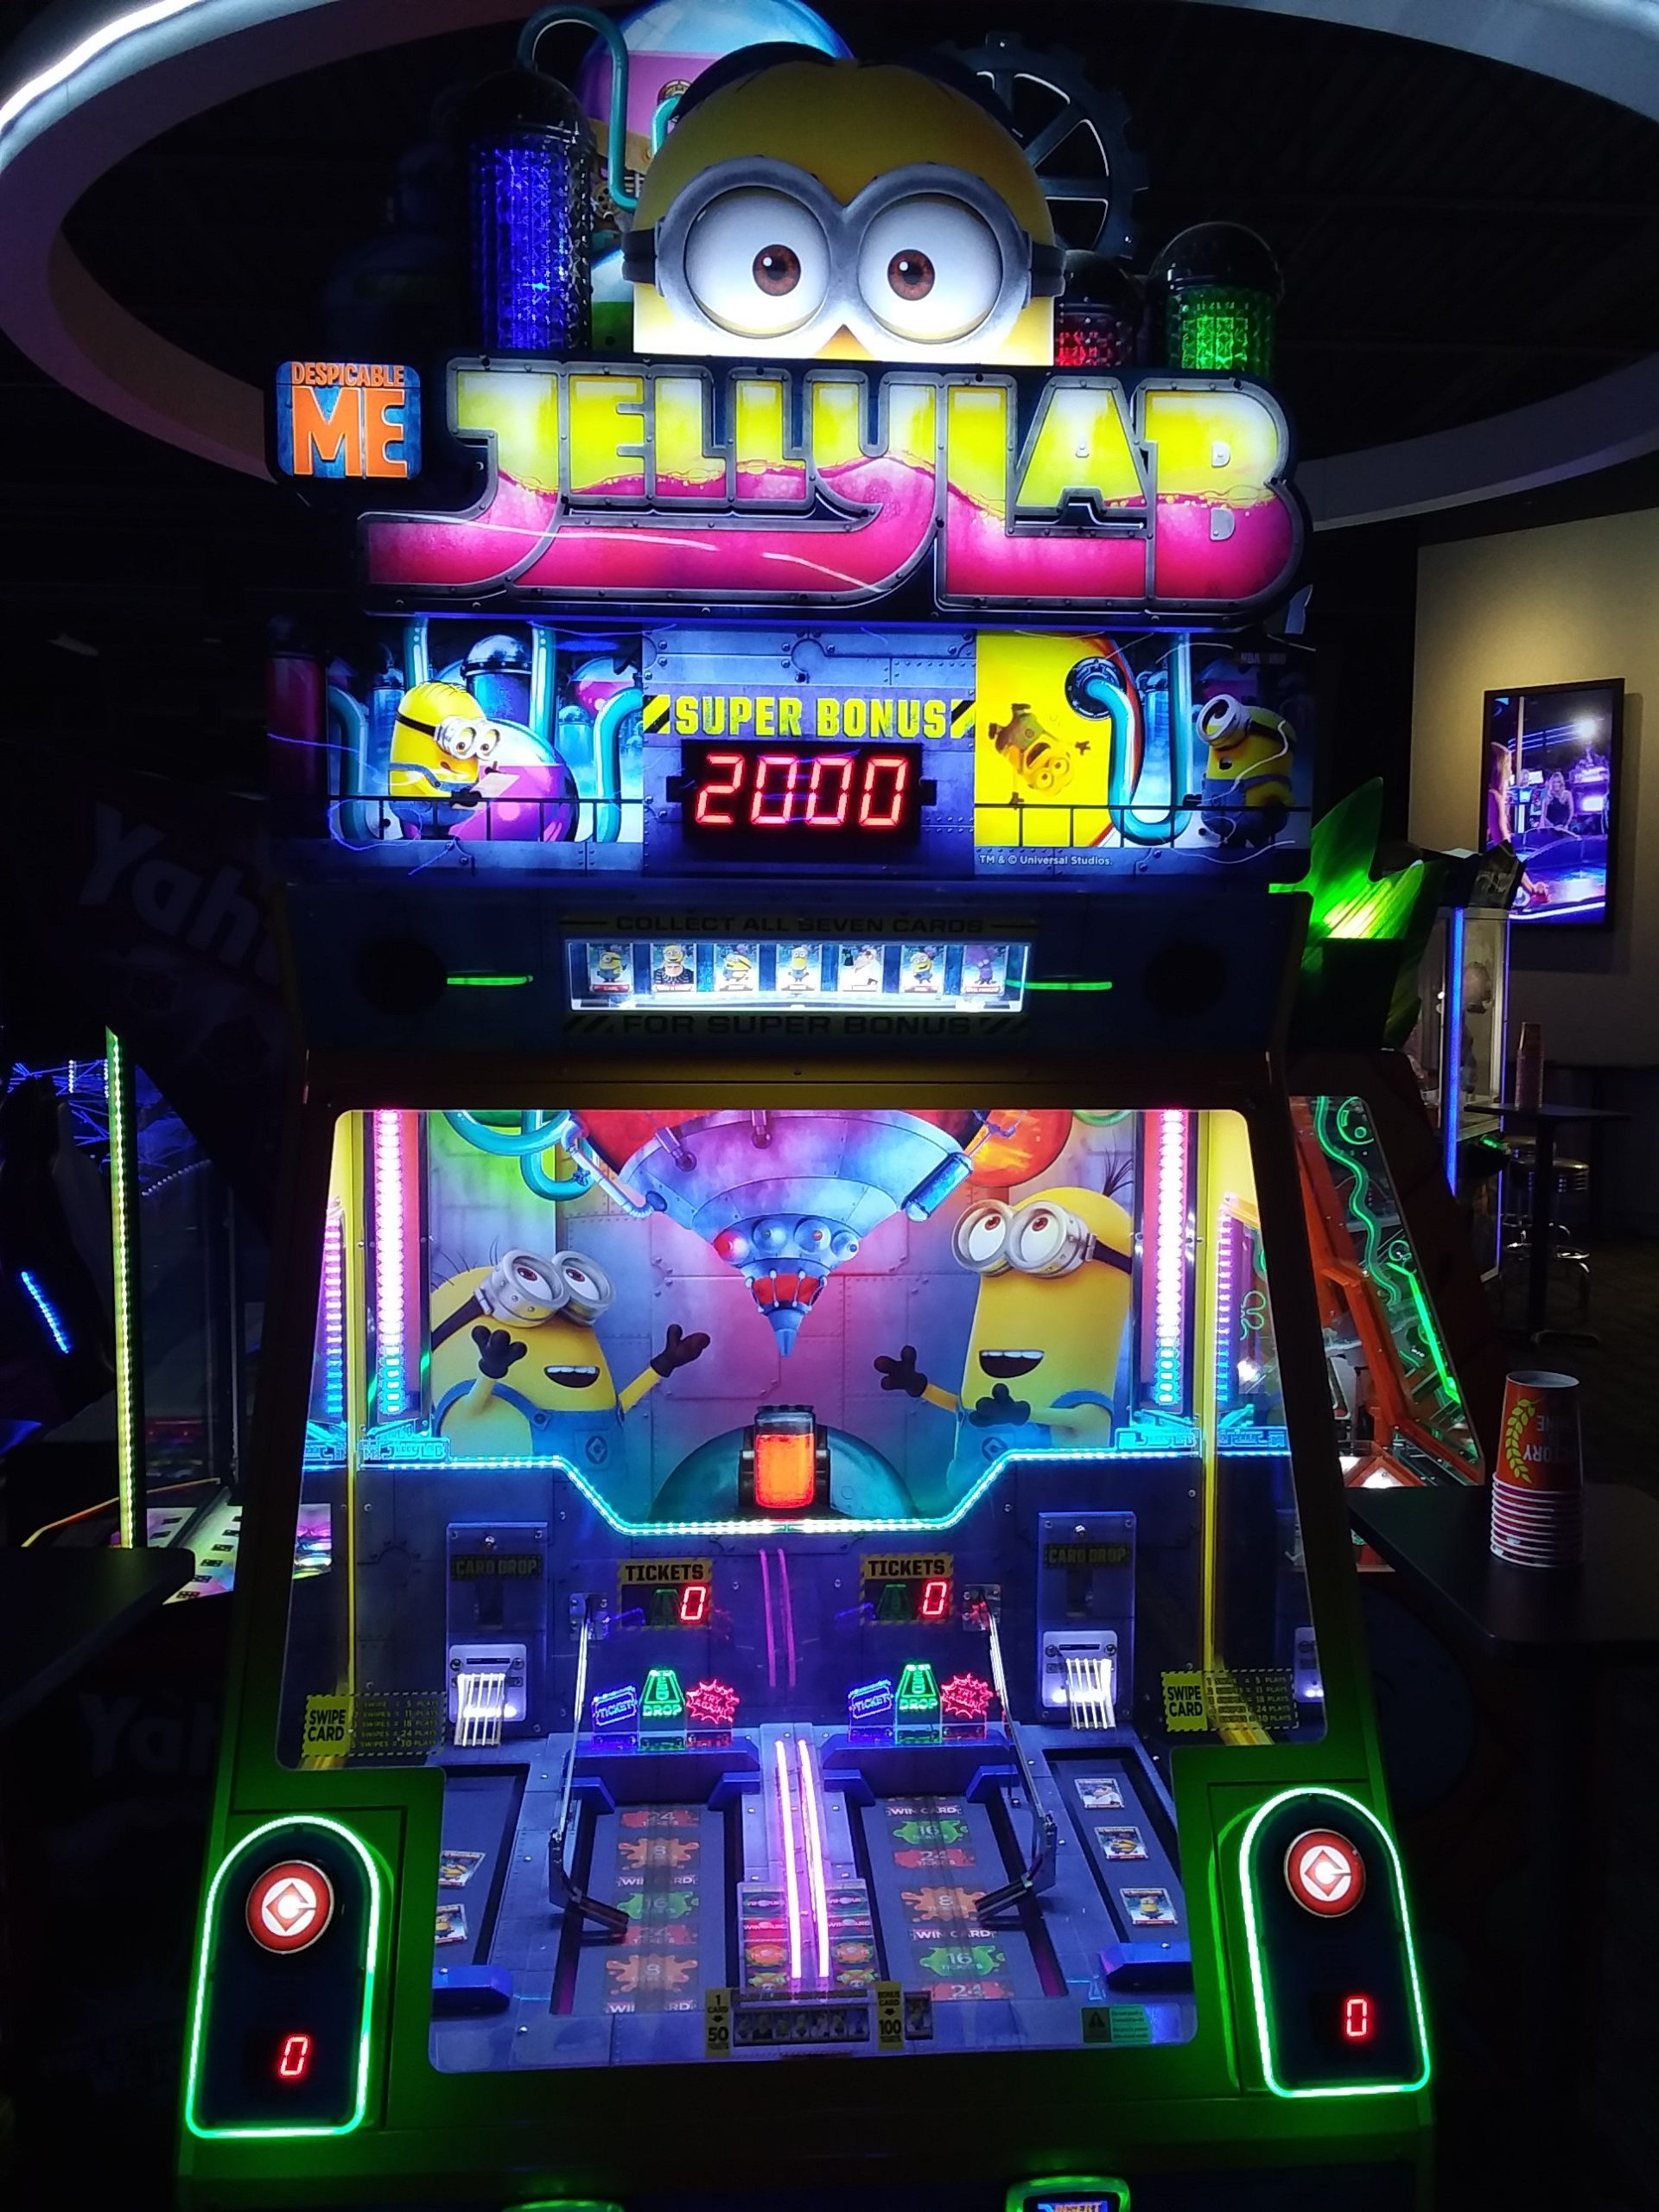 despicable me jelly lab arcade game machine